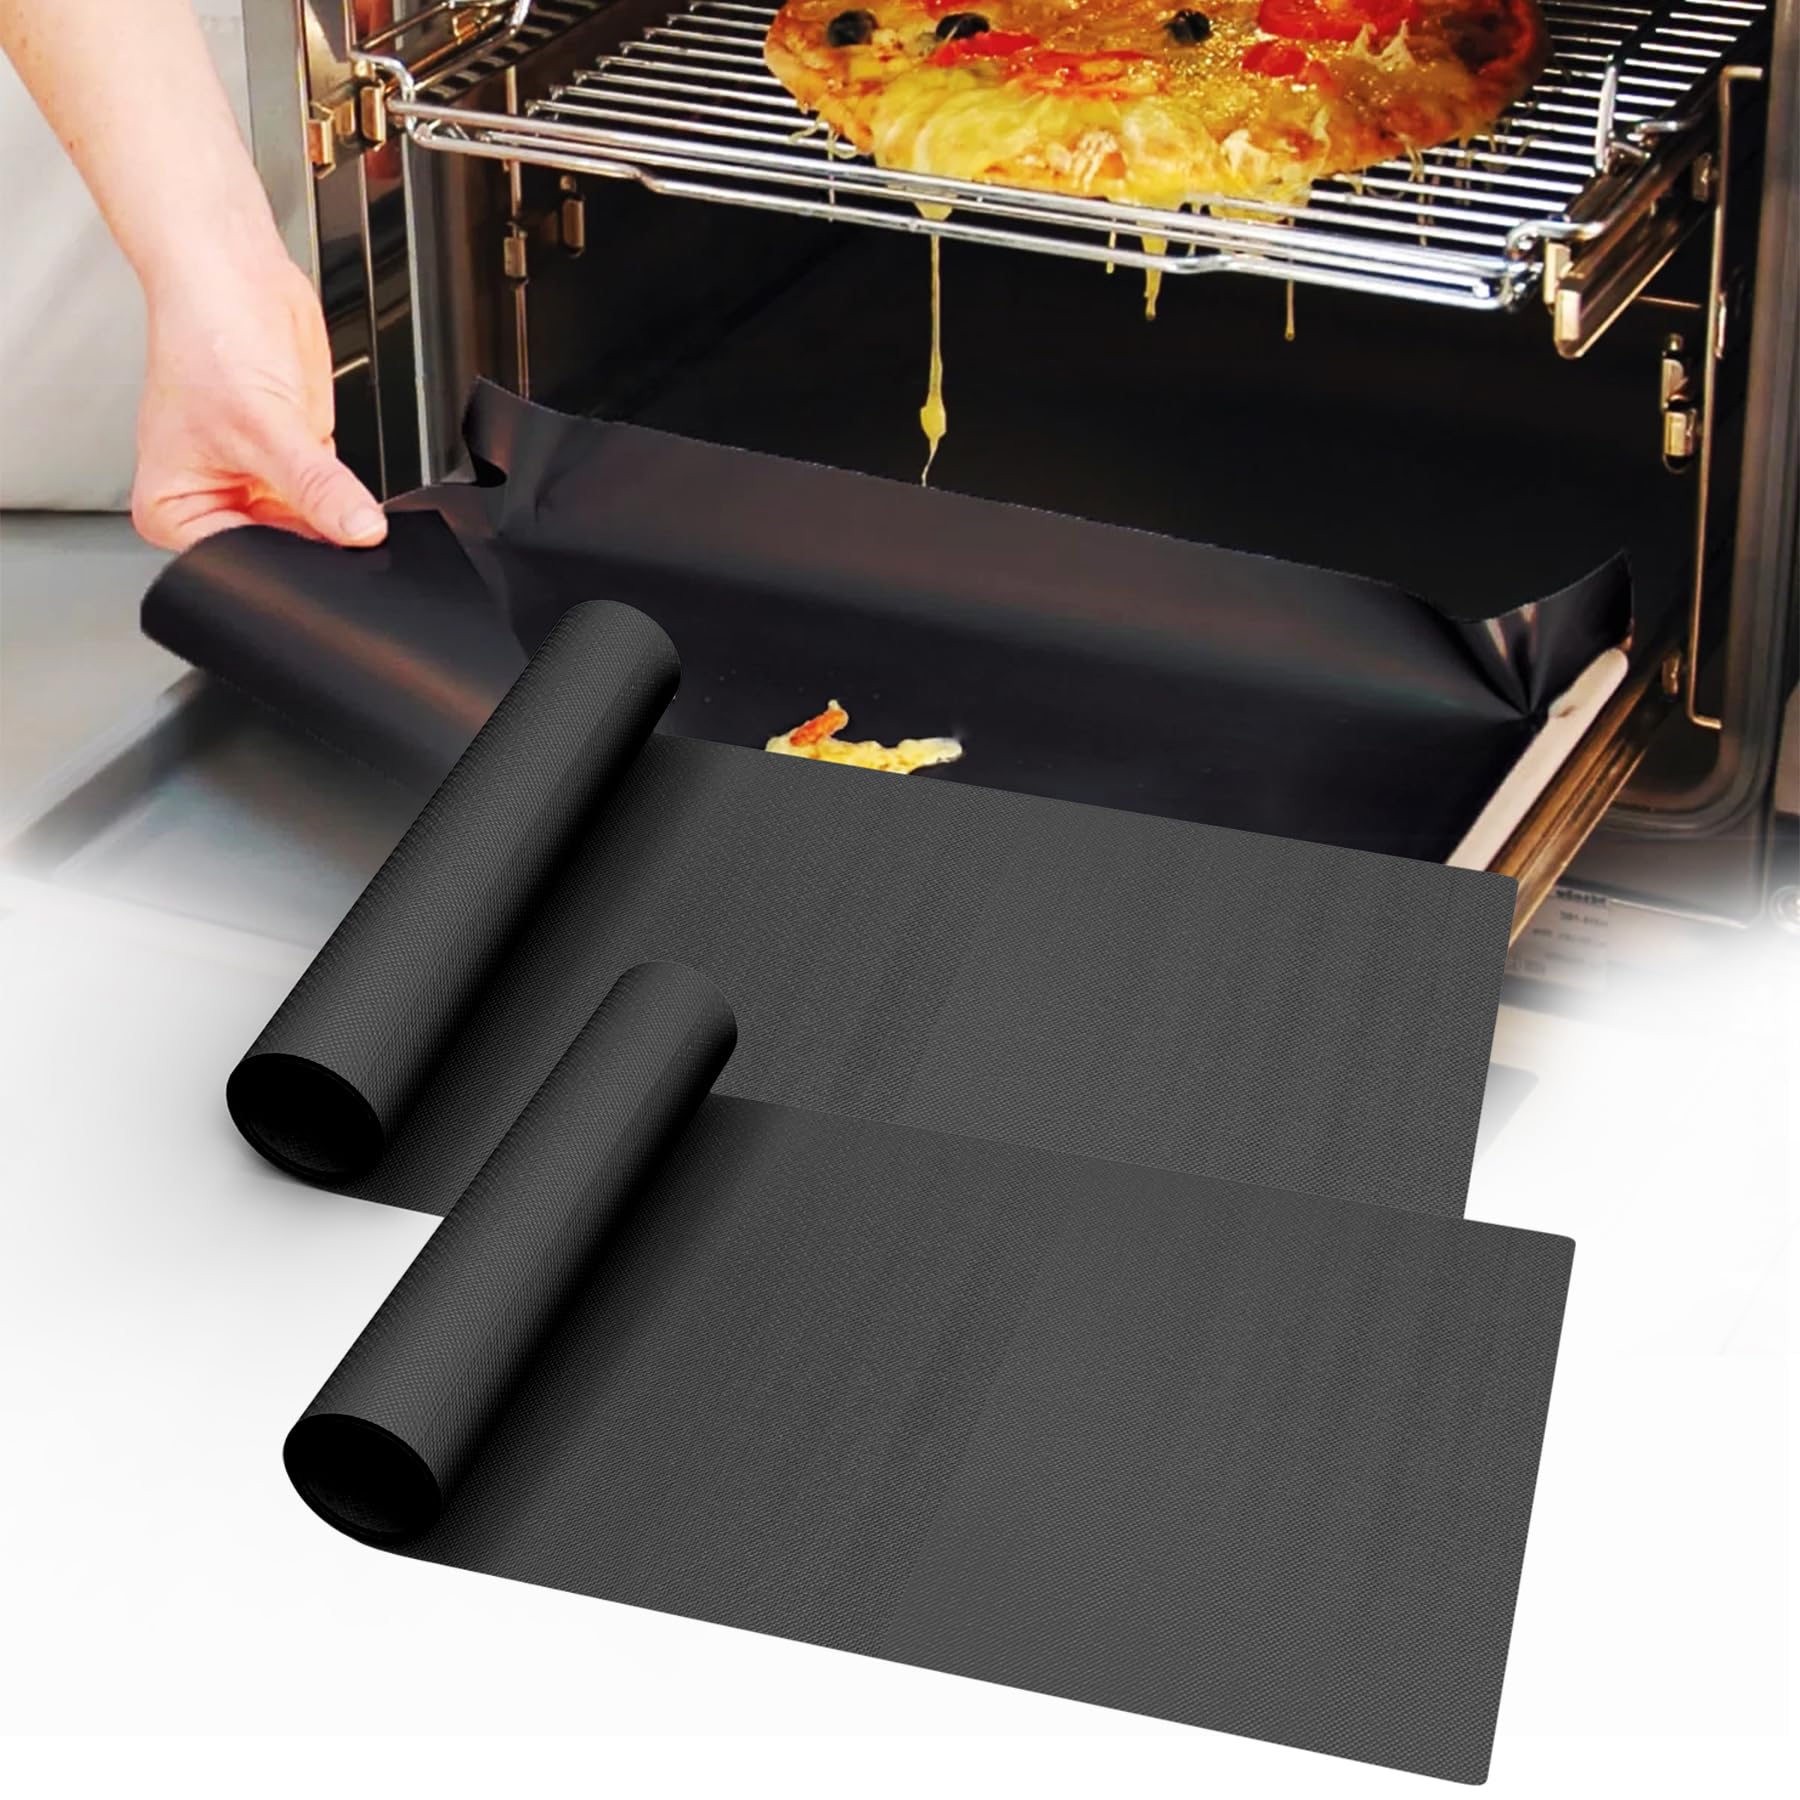 UBeesize 2 Pack Large Oven Liners for Bottom of Oven BPA and PFOA Free，16